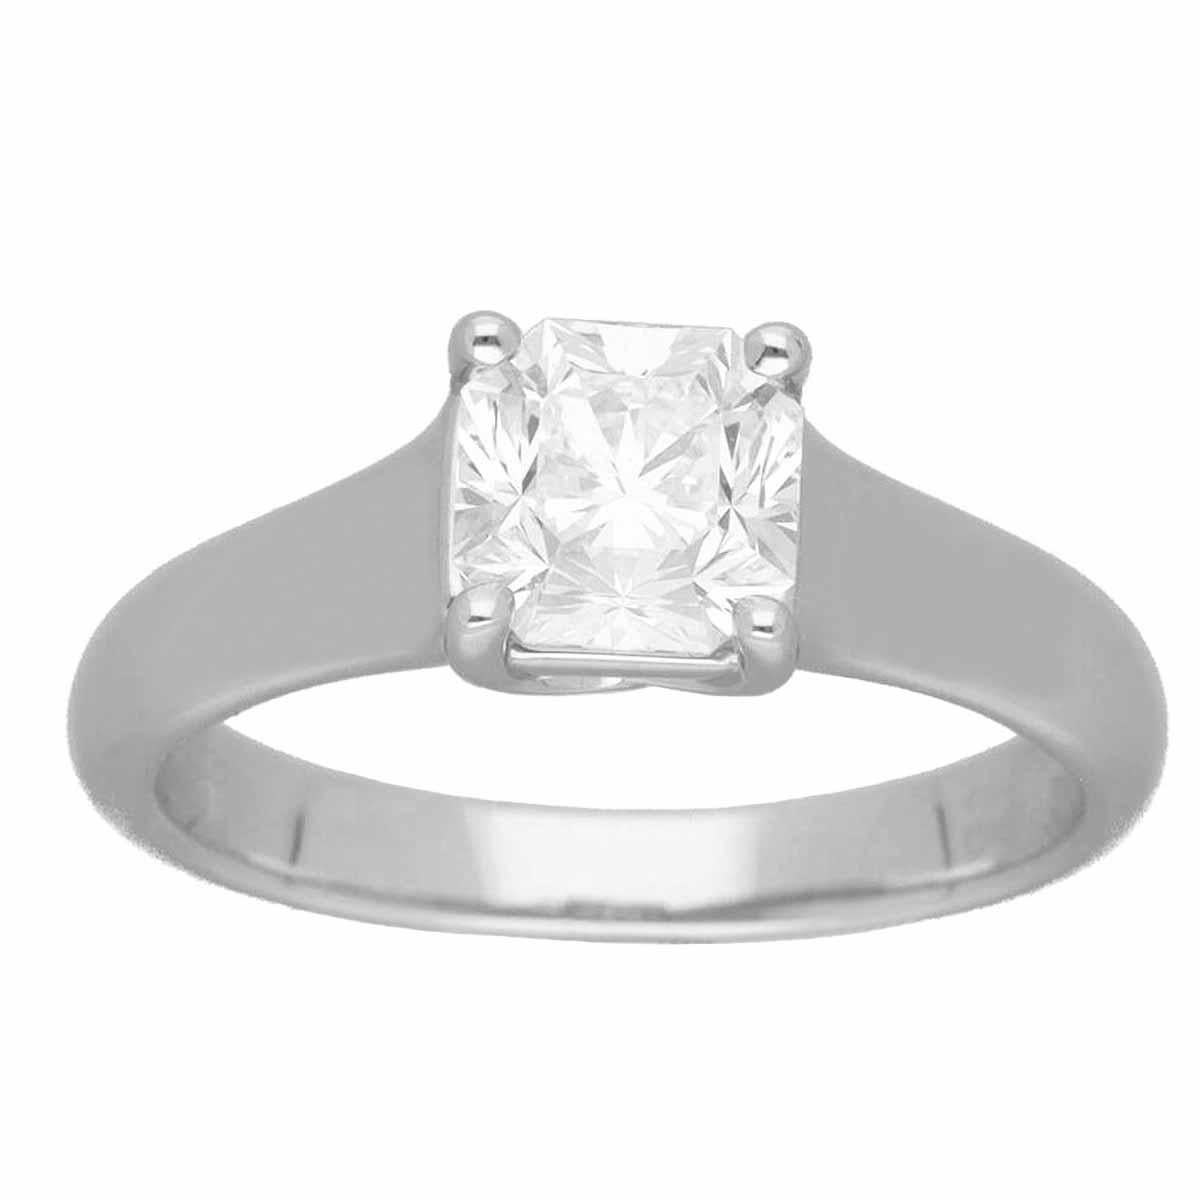 Brand:TIFFANY&Co
Name:Lucida Diamond Ring
Material:1P diamond (0.93ct E-VS1), Pt950 platinum
Comes with:Tiffany case, tiffany Diamond Certificate
Weight:5.1g（Approx)
Ring size:British & Australian:H 1/2  /   US & Canada:4 1/4 /  French & Russian:47